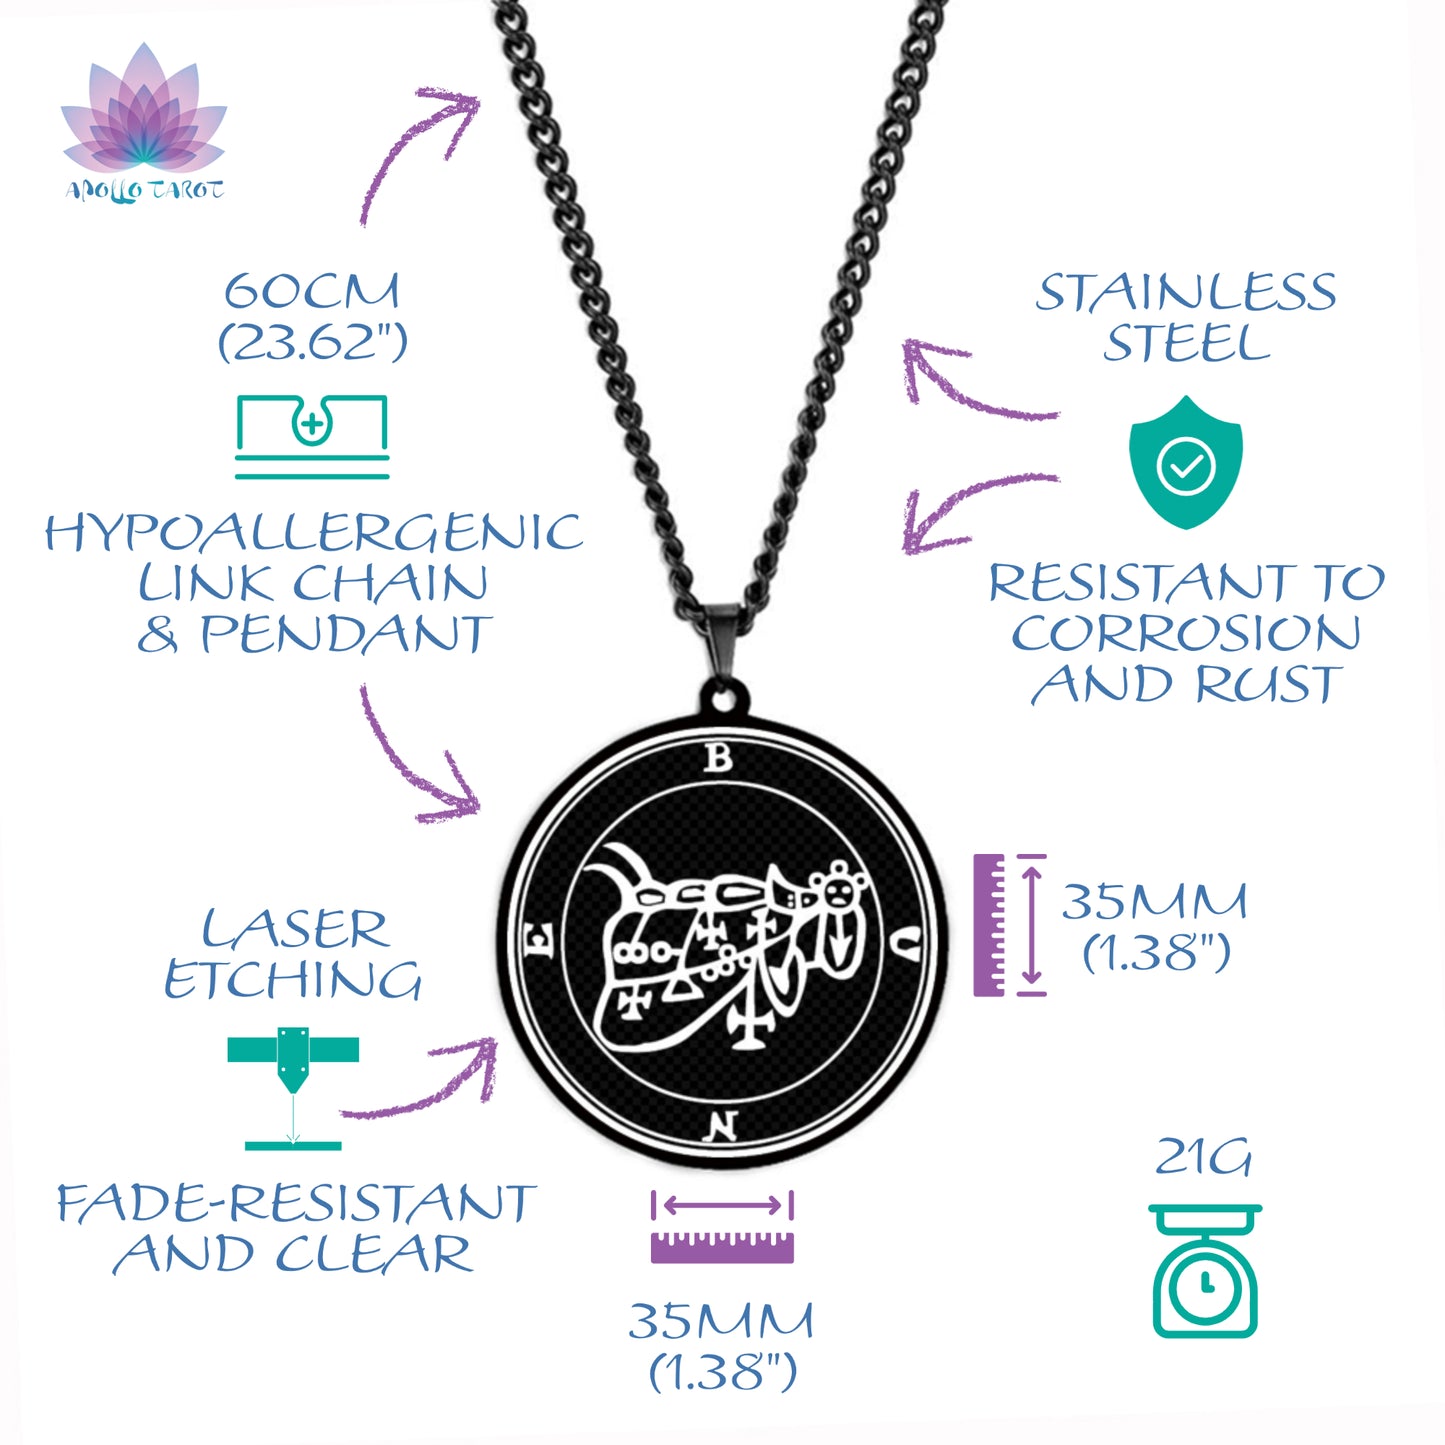 Black Necklace With Seals Of The 72 Spirits In The Lesser Key of Solomon | King Asmoday Demon Origins Goetia Stainless Steel Pendant | Apollo Tarot Jewelry Shop